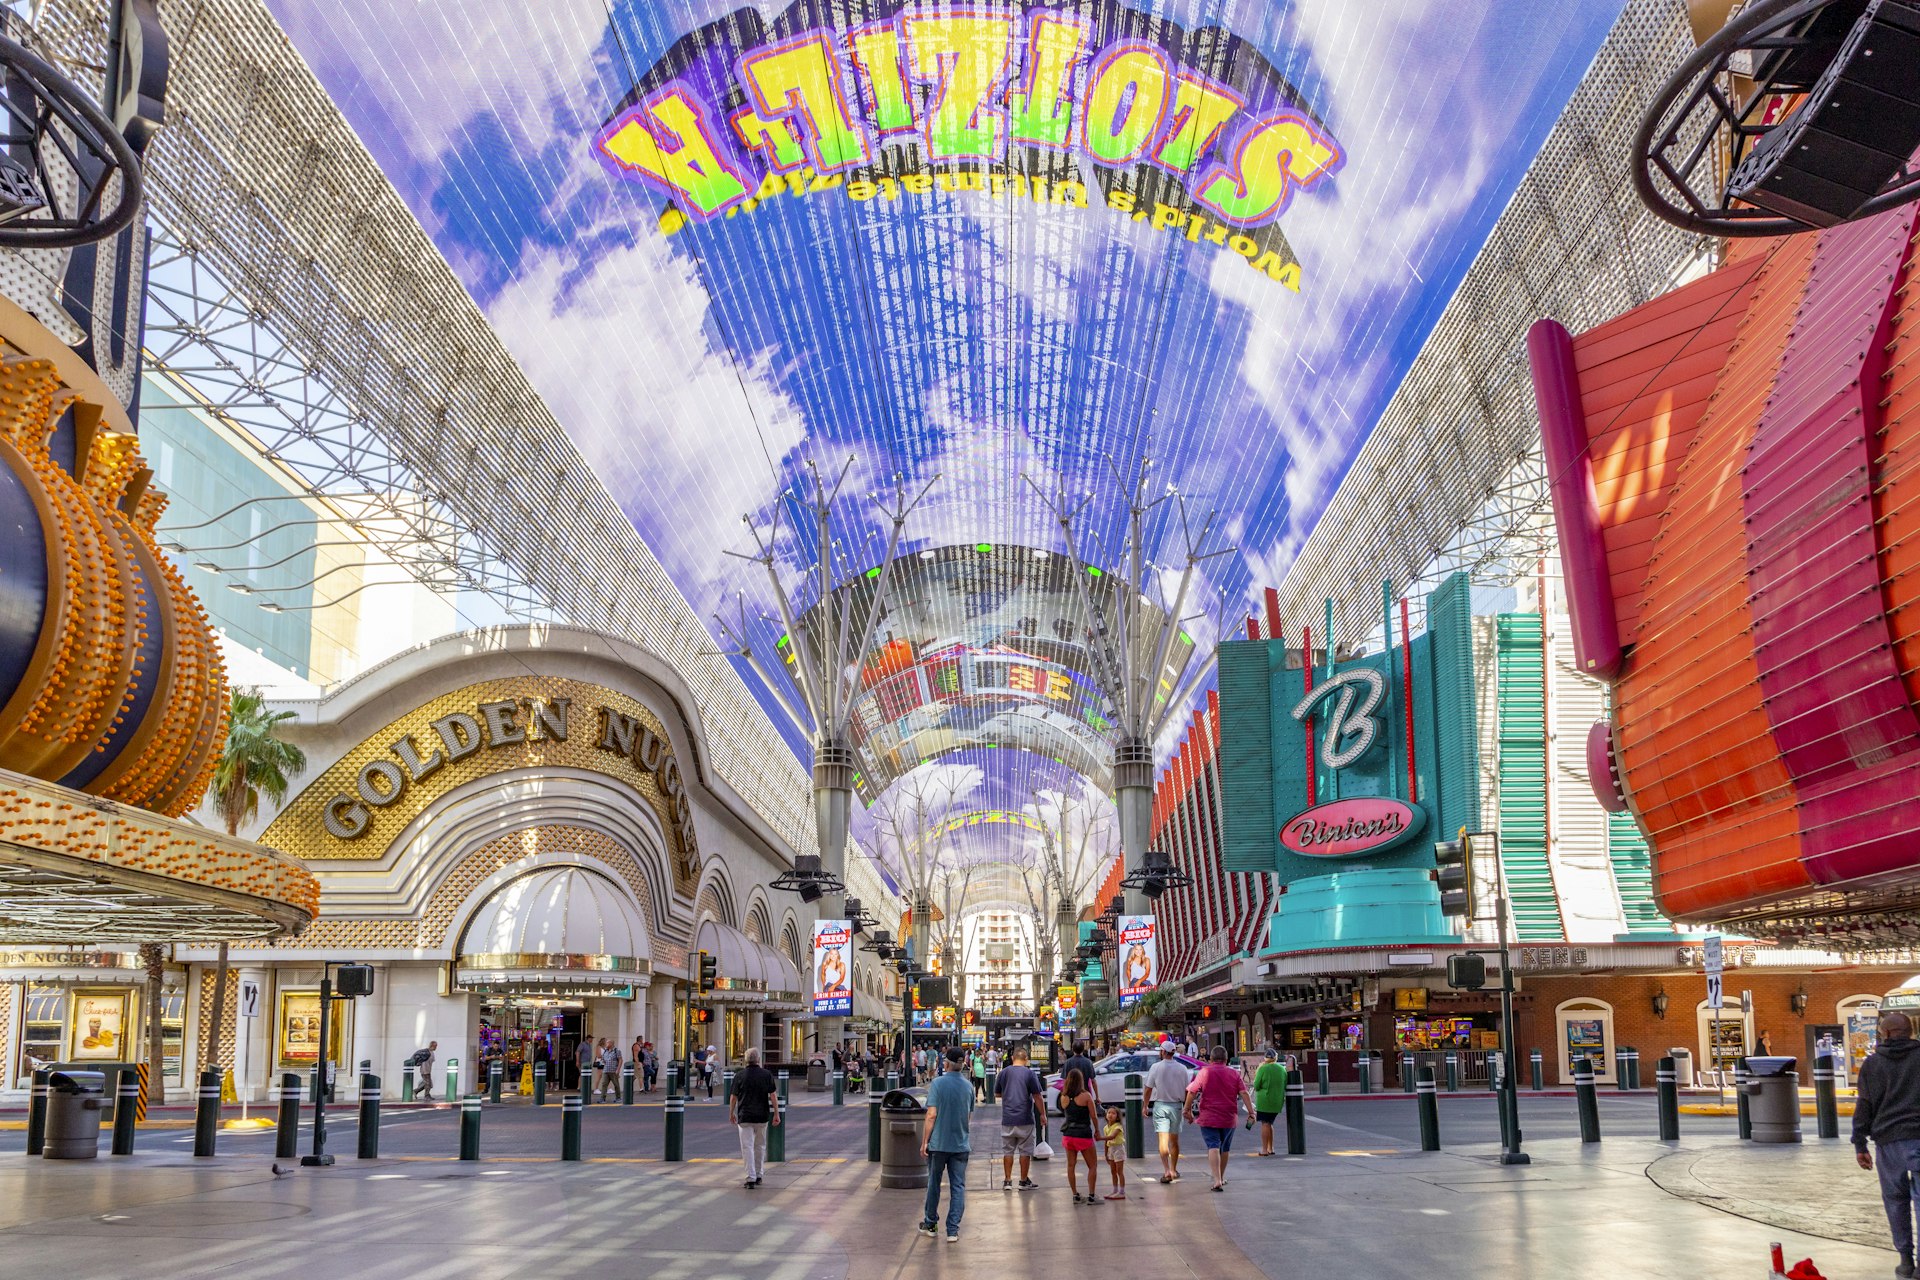 Hustle and bustle of crowds during the day on the famous Fremont Street in the heart of downtown Las Vegas with its casinos, neon lights and street entertainment.